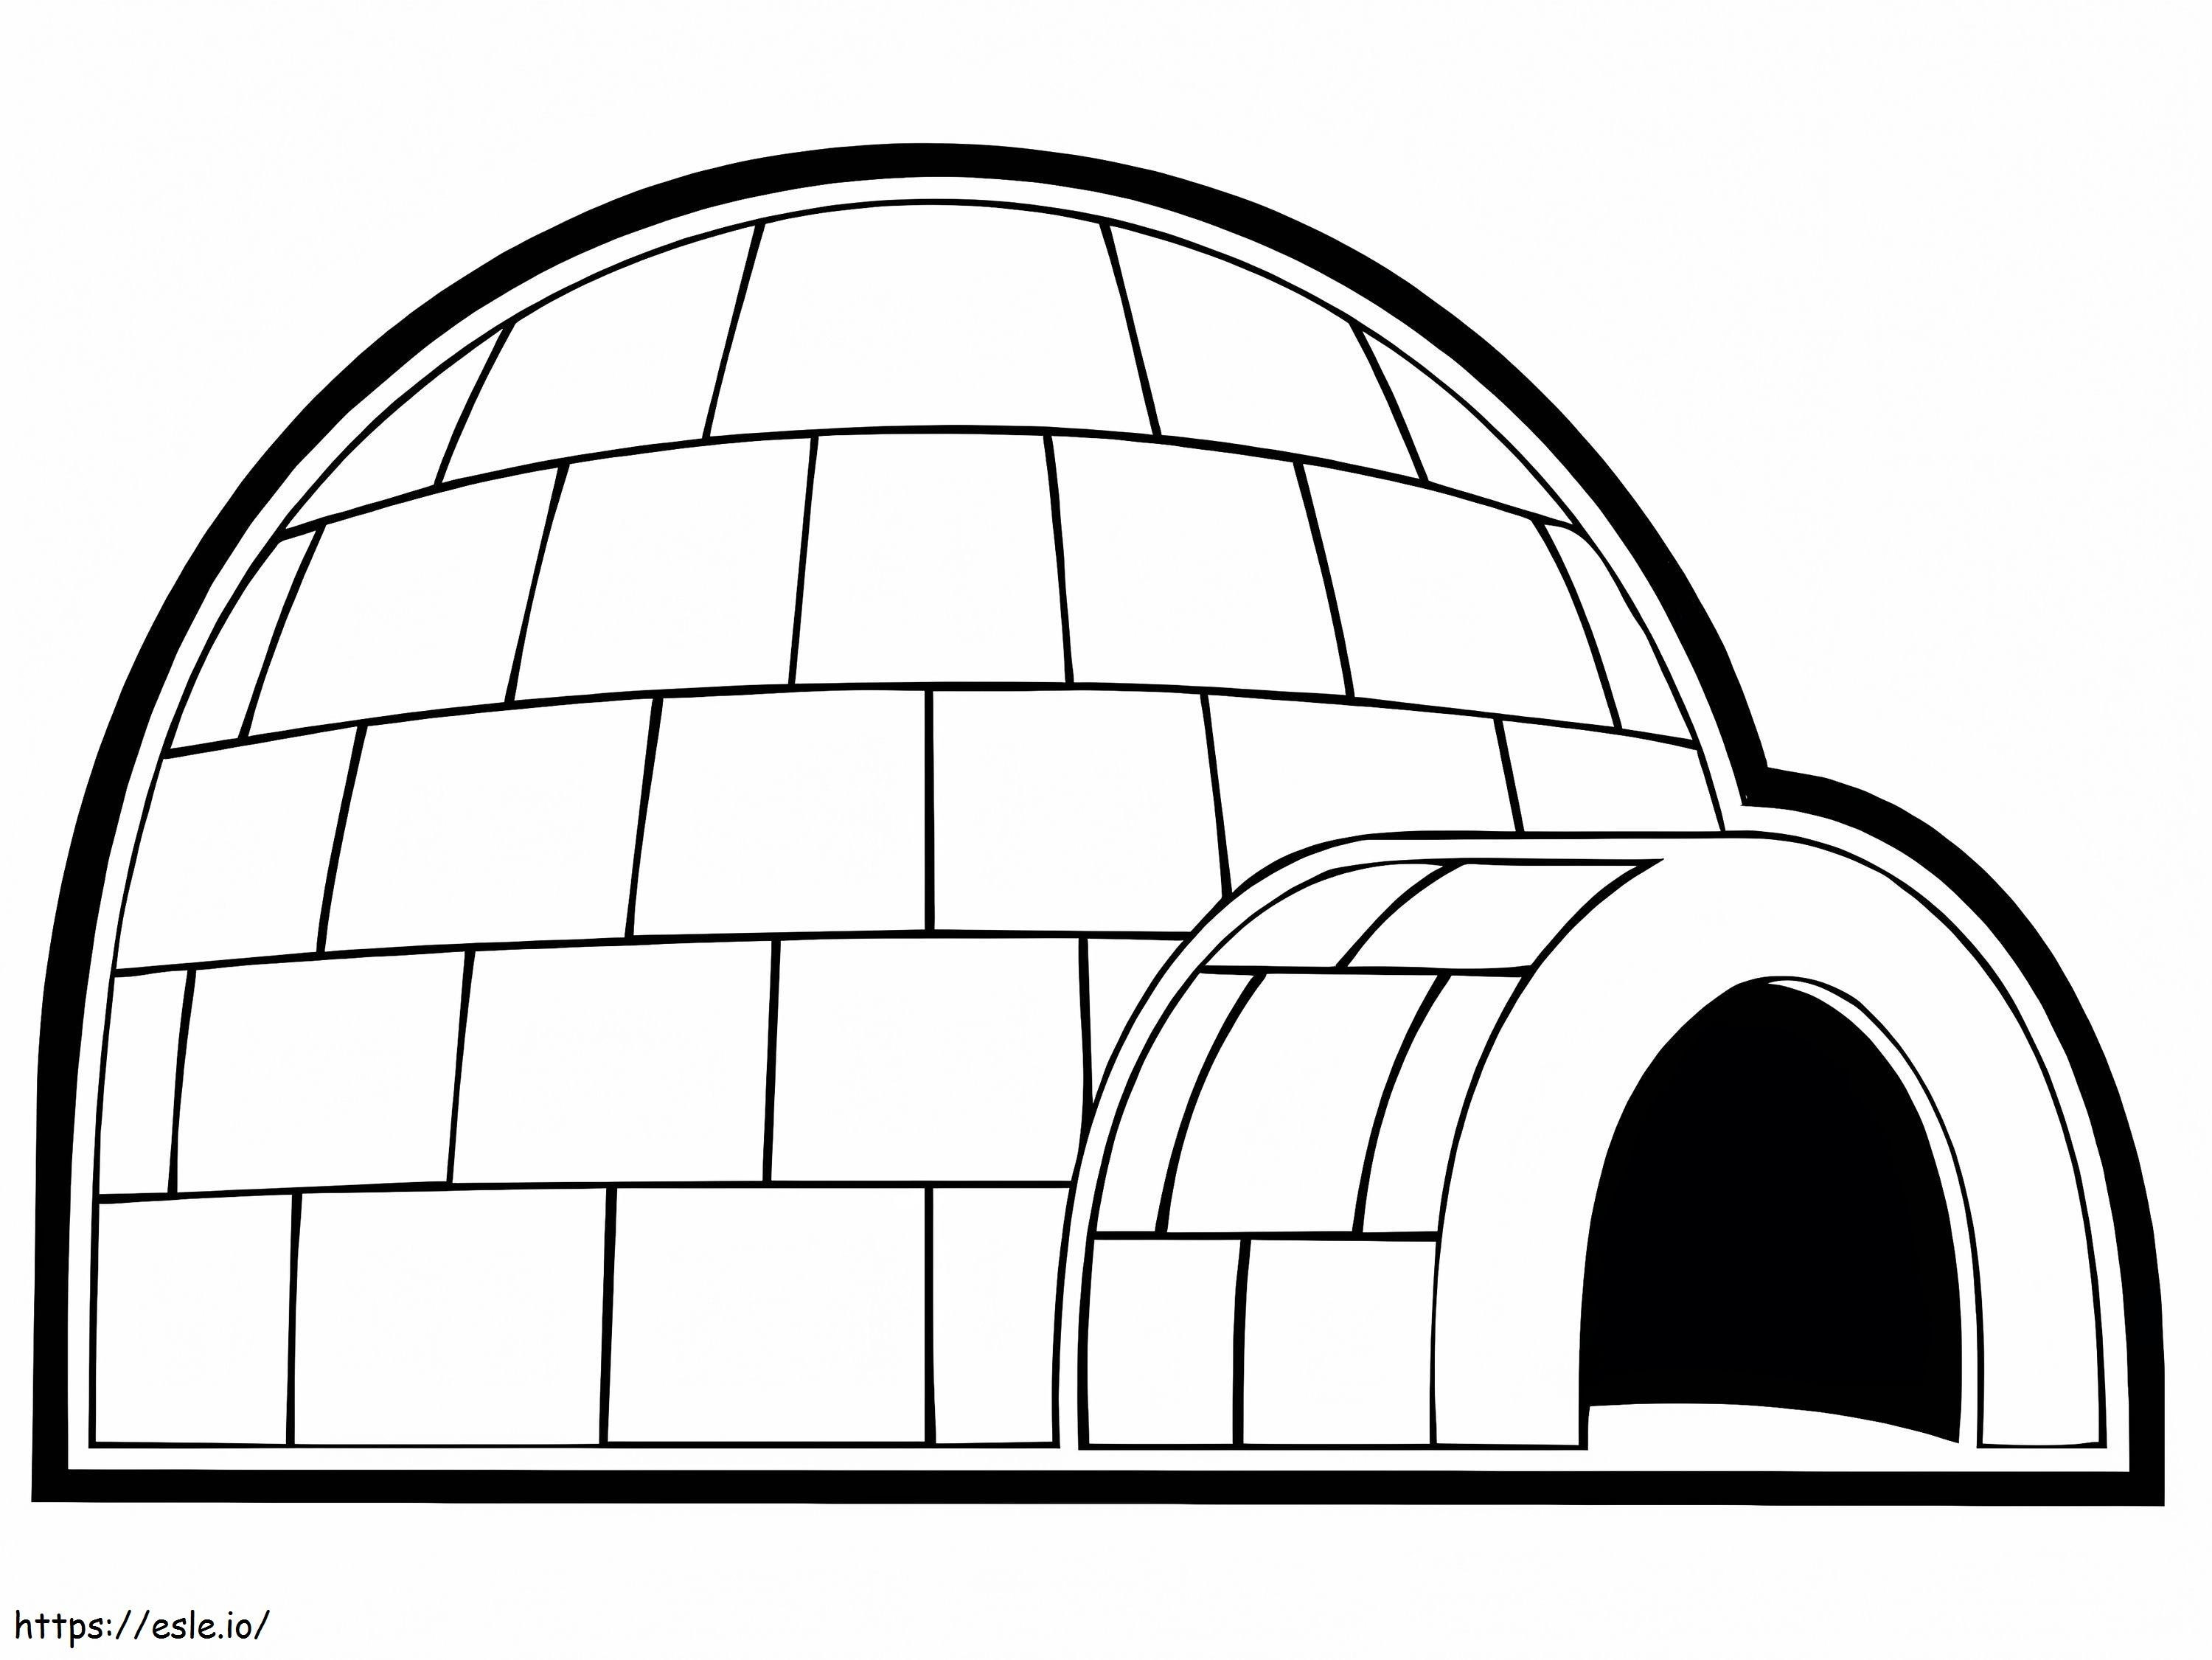 Igloo 4 coloring page